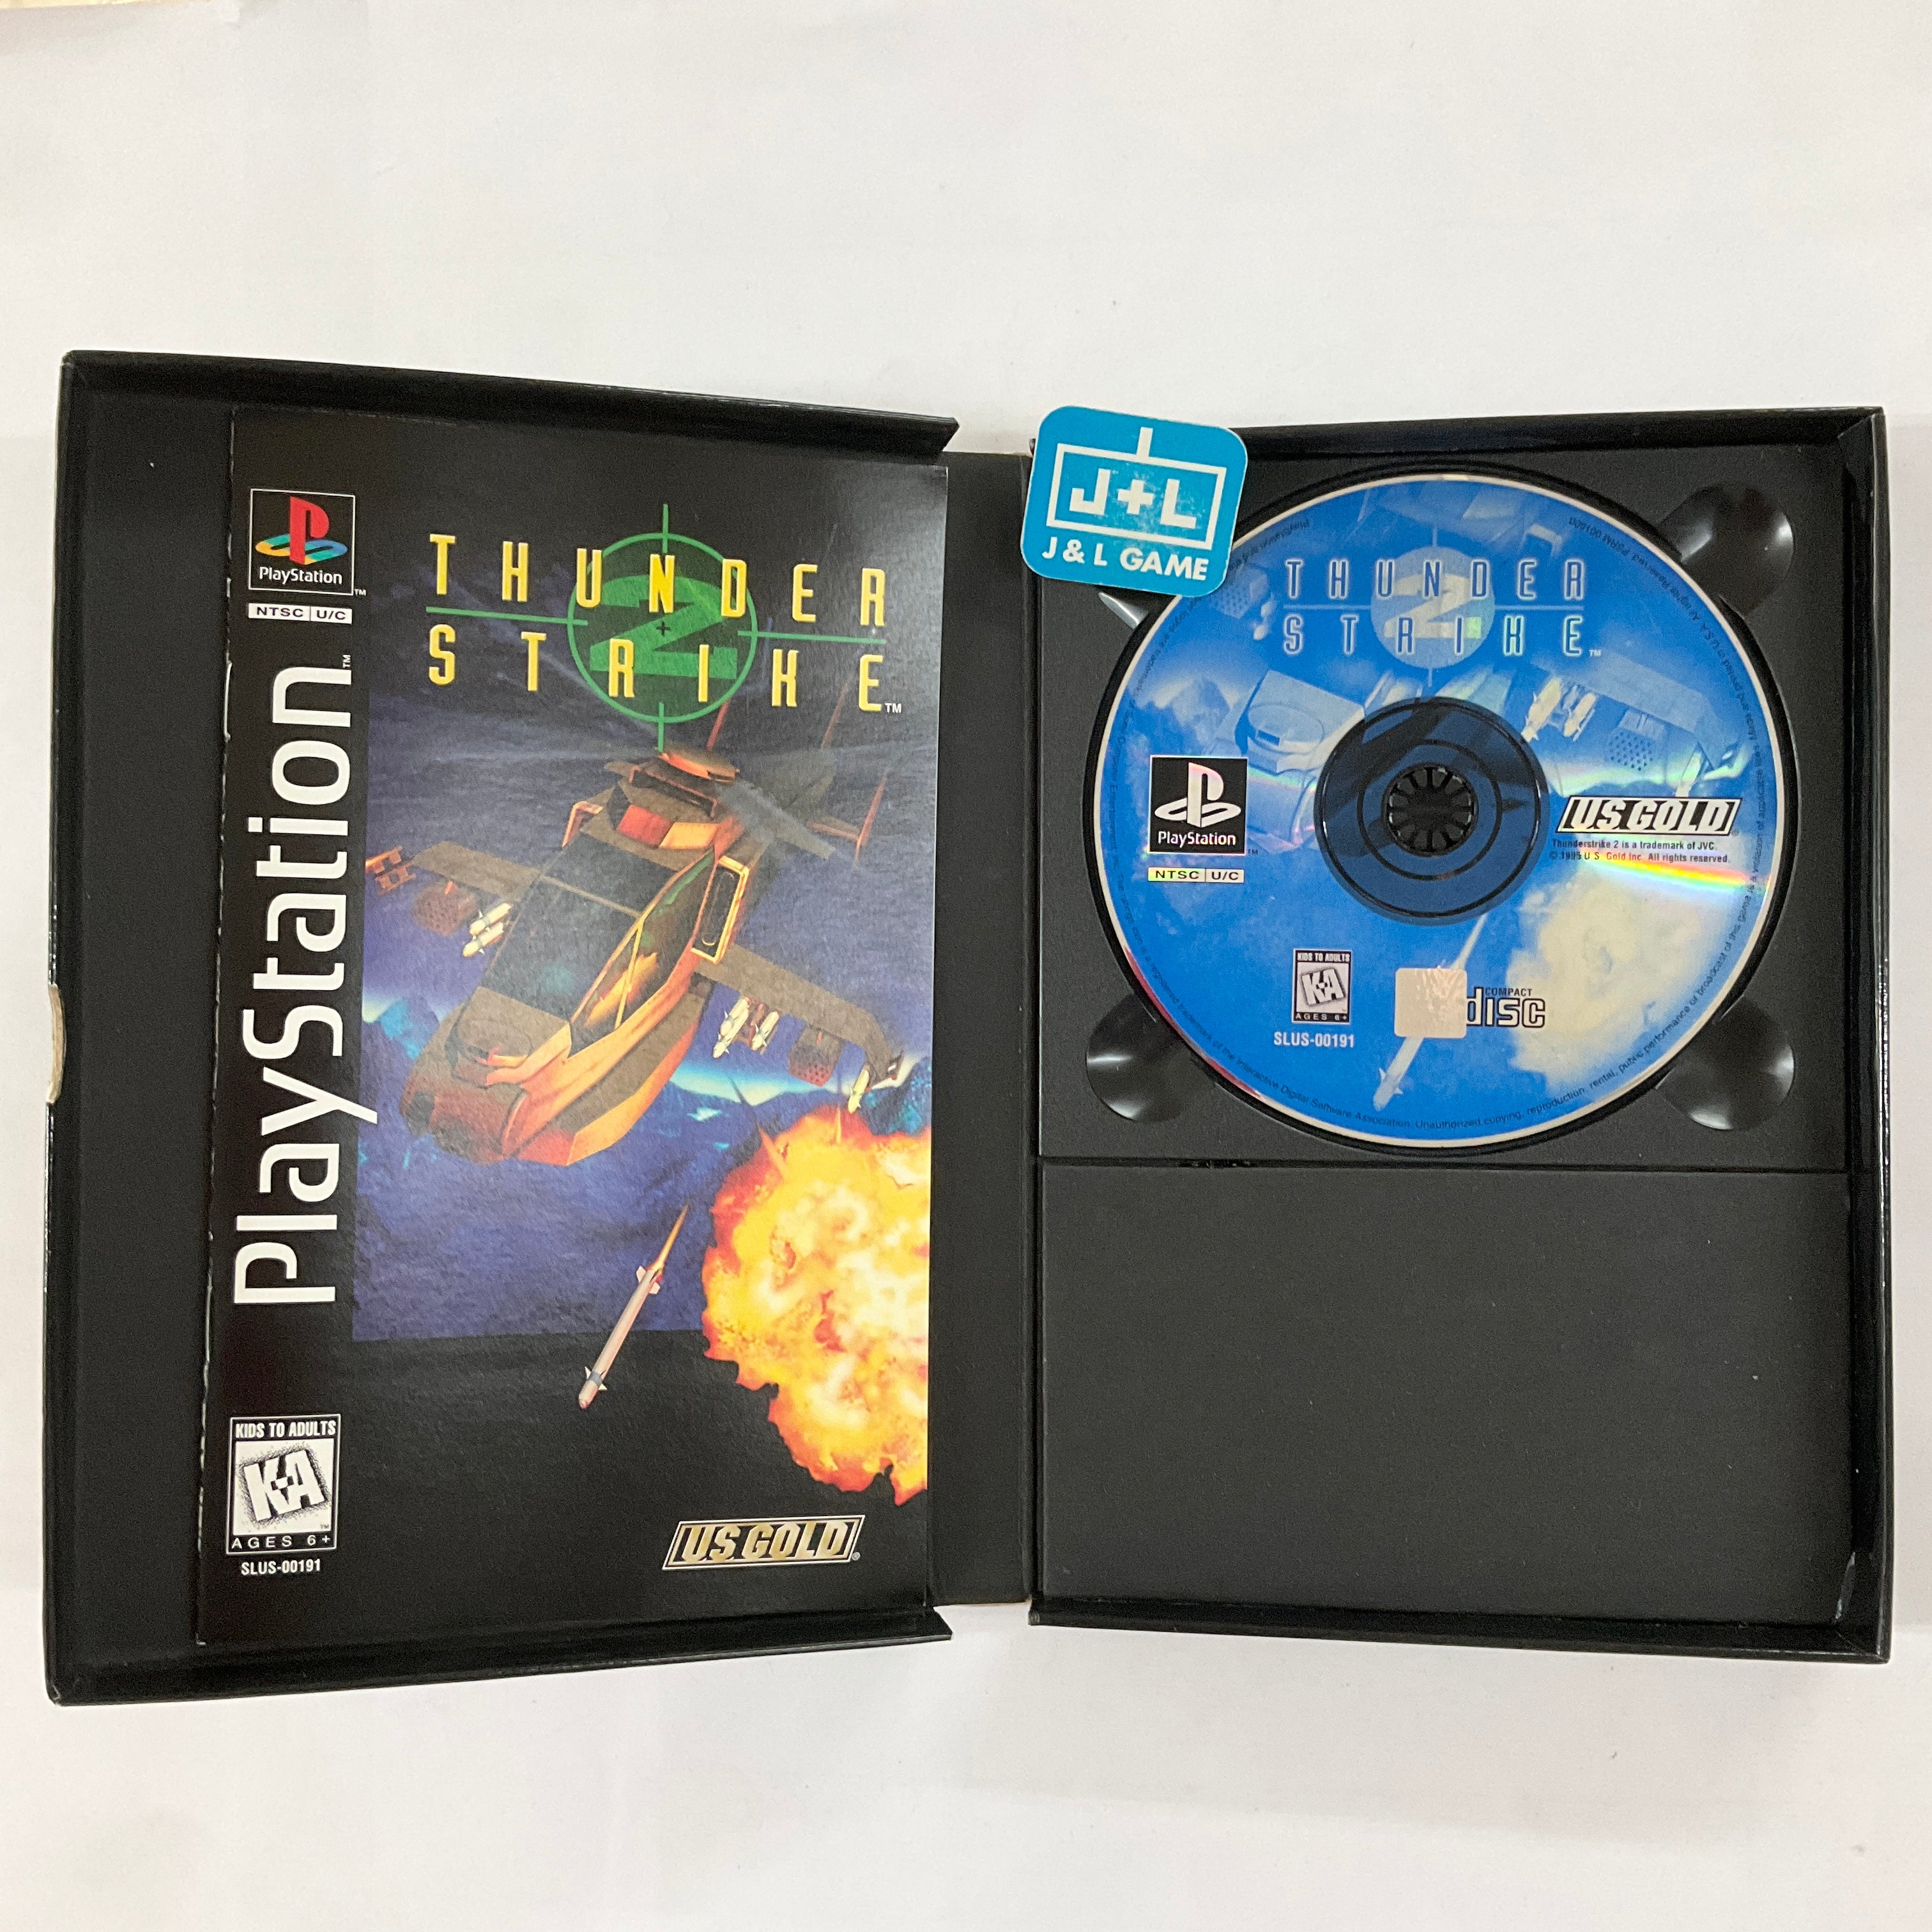 ThunderStrike 2 (Long Box) - (PS1) PlayStation 1 [Pre-Owned] Video Games Eidos Interactive   